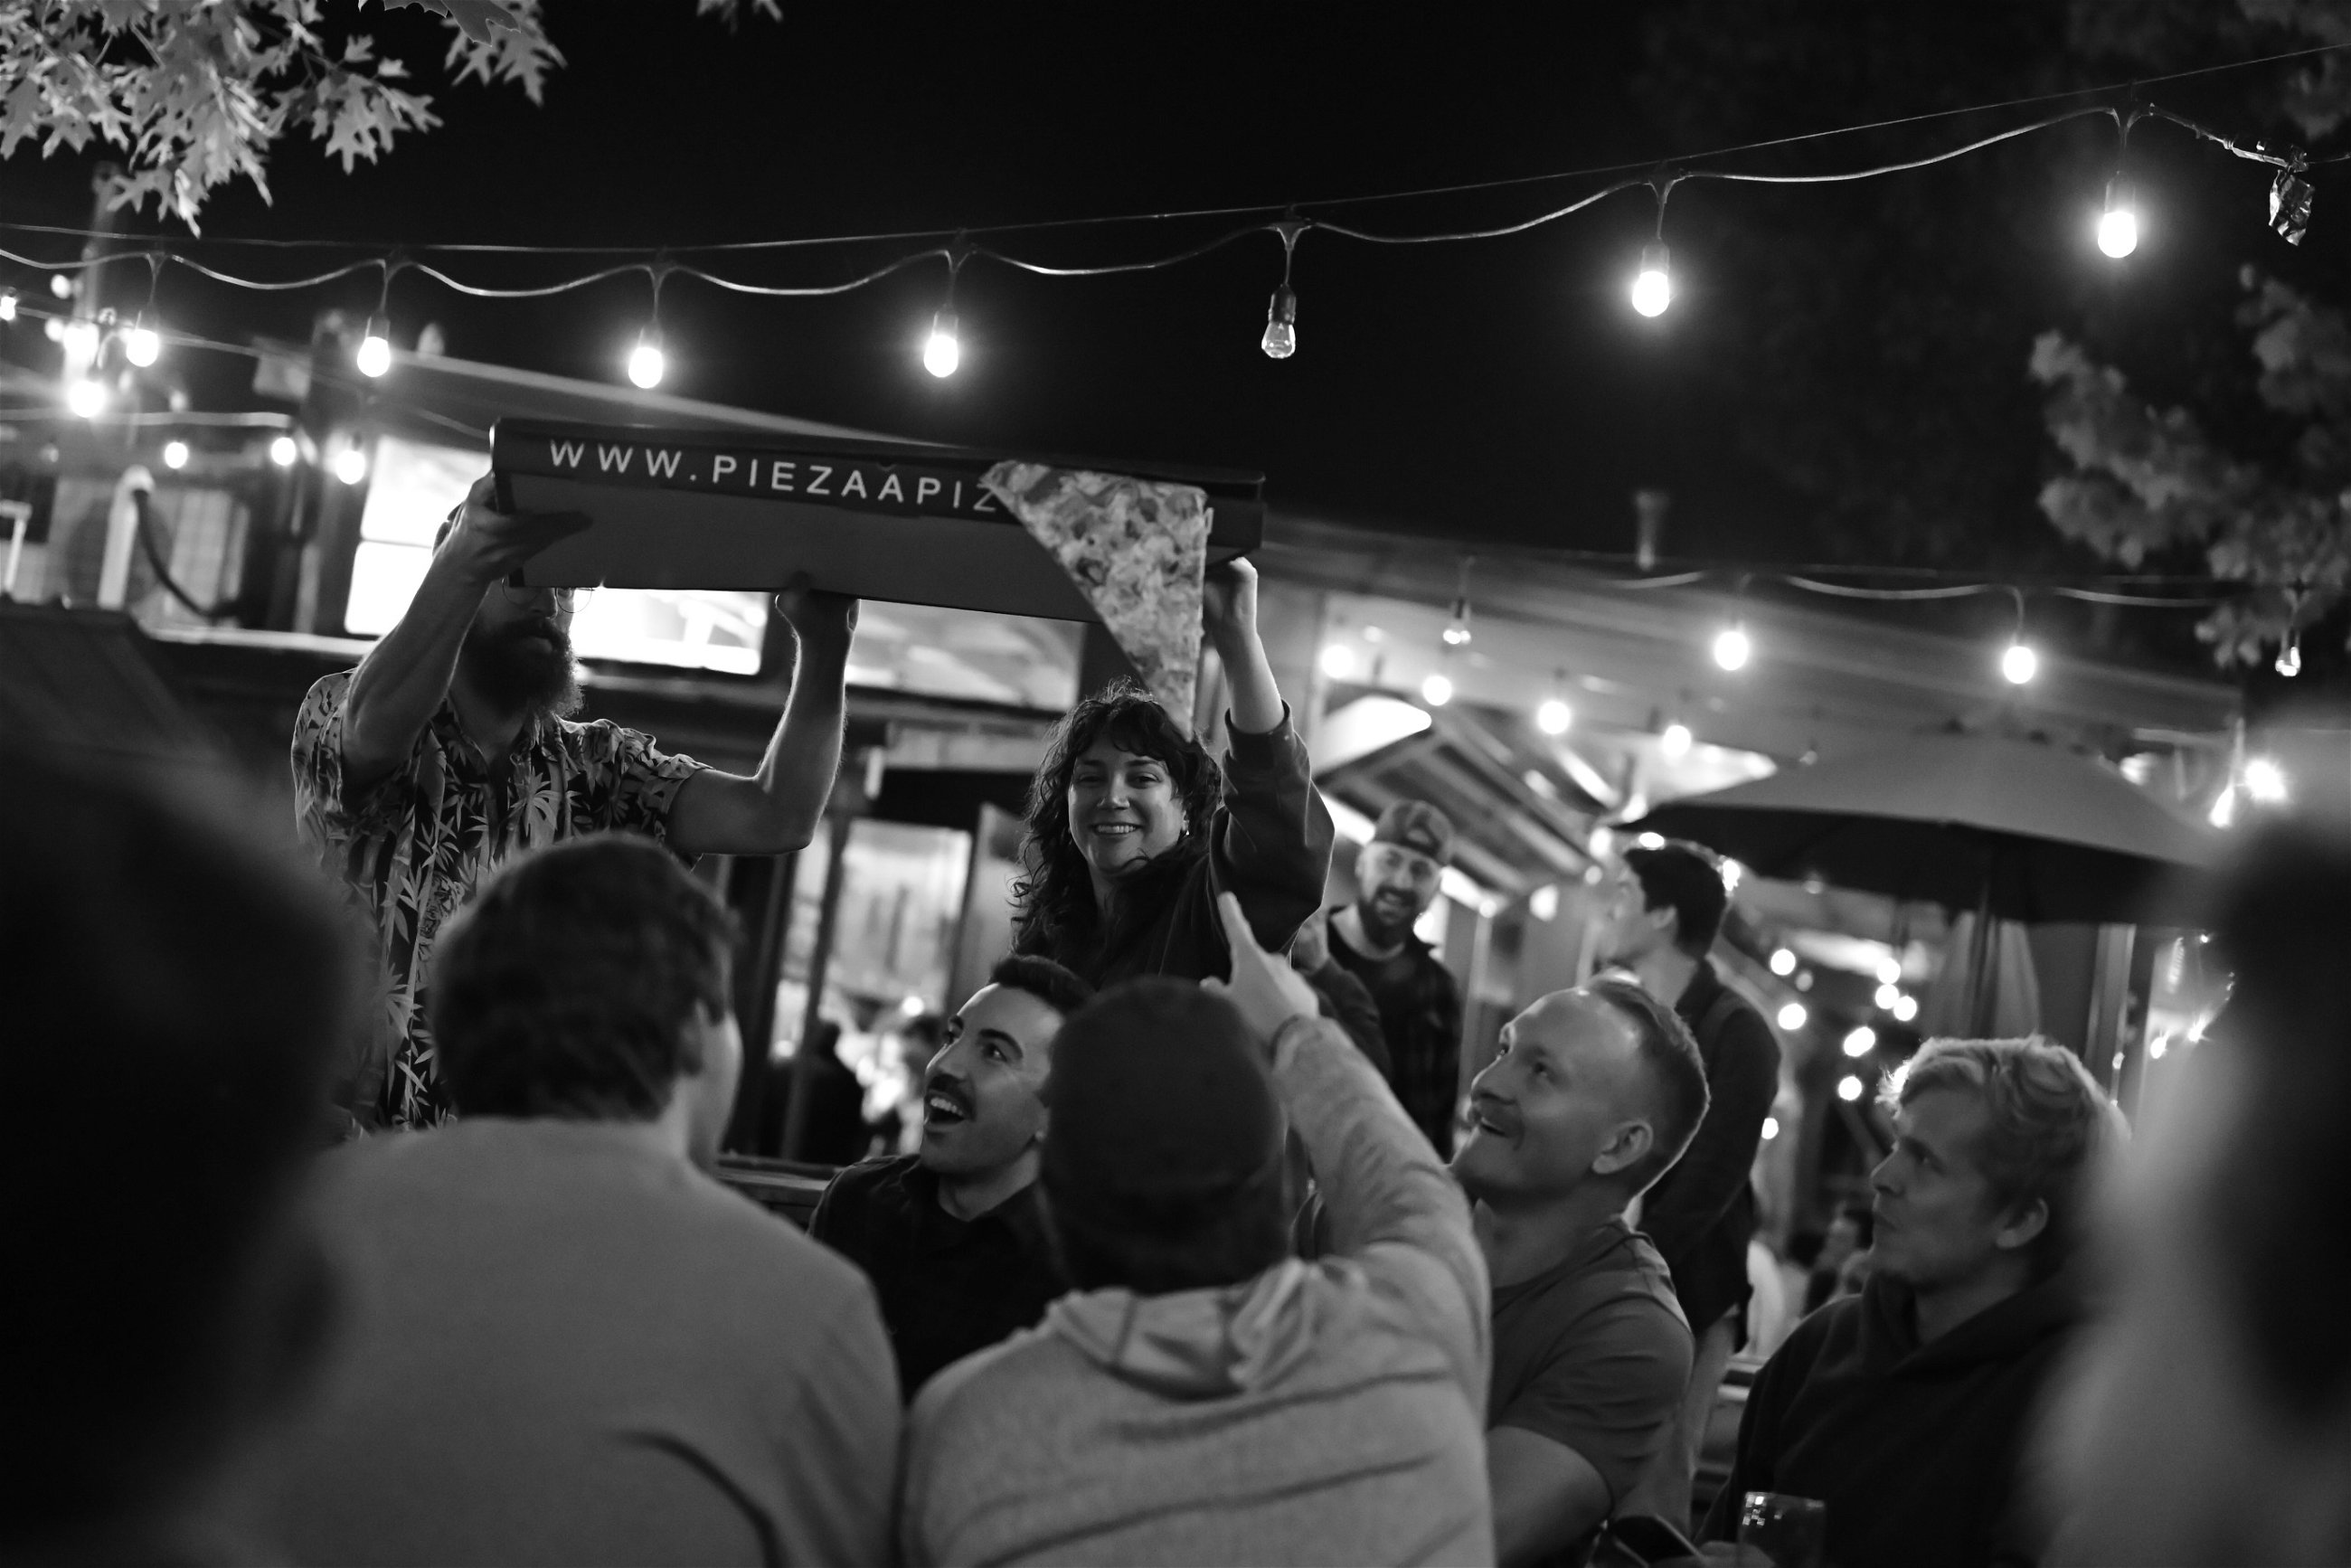 A black and white photo captures a lively scene at an outdoor gathering under string lights. A person in the center is holding up a large pizza box from "Piezaa Pizza" with a slice of pizza in hand, while others around them look up, smiling and pointing at the pizza. The ambiance suggests a casual, festive atmosphere with people enjoying food and company.